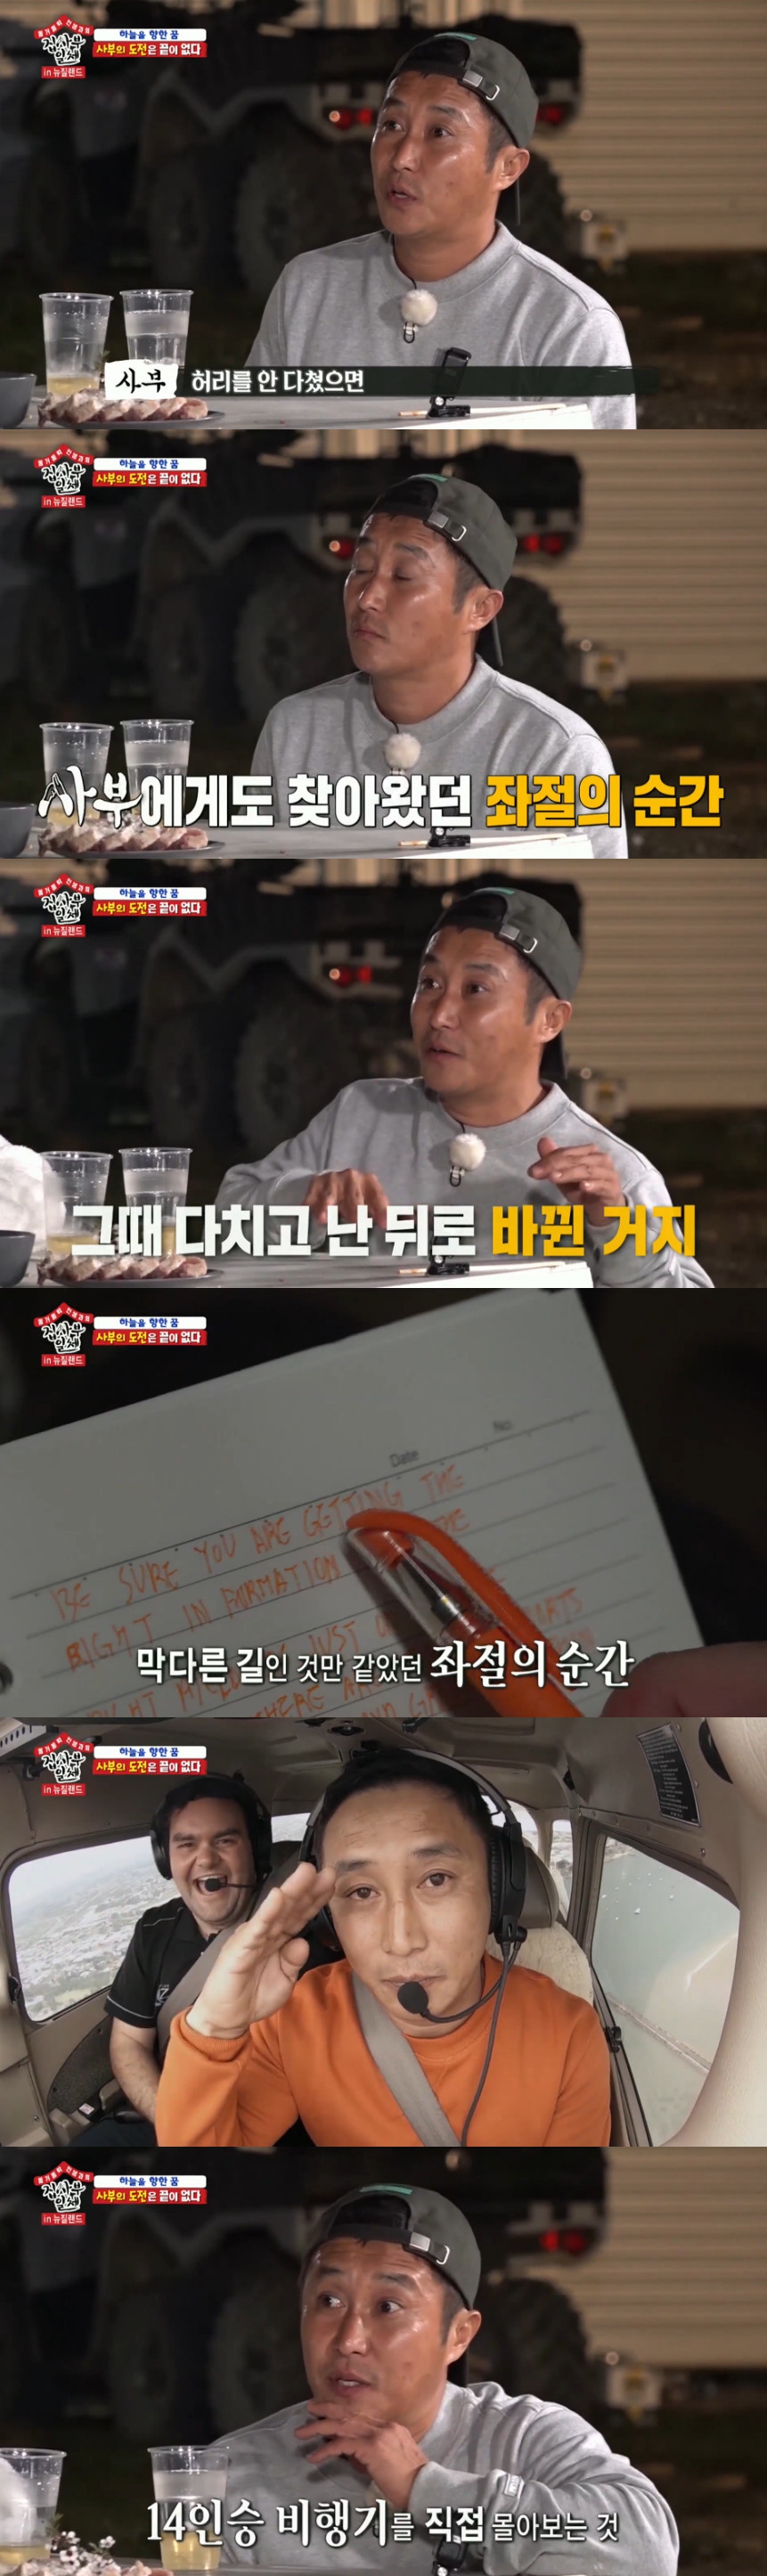 Comedian Kim Byung-man reveals why he didnt give up Planes pilot dreamSBS All The Butlers broadcast on December 22 was decorated with Kim Byung-man 2.Kim Byung-man decided to appear once again on All The Butlers following last October.Lee Sang-yoon, Lee Seung-gi, Yang Se-hyeong, and Yook Sungjae left for New Zealand to meet Master Kim Byung-man.Kim Byung-man said on the day of the broadcast, I was a little bit like it, but when I looked at many people, I studied and grew up.I enjoy it as much as I know, so I learn more there, so camping and enjoying it is different. I think I have a lot of desire to learn. In addition, Big Fish, which was directly trimmed to the rising type, and a big fish steak made by the person, was impressed.Lee Sang-yoon, who caught Big Fish, said: It just seems to stick to the corner from the mouth.I think I know why Im so powerful when I eat it, Yook Sungjae praised it as This is really delicious, it seems to be much more delicious than a really expensive sushi restaurant. Kim Byung-man asked Lee Seung-gis praise that Kim Byung-man and All The Butlers seem to fit well, So should I come out for the third time?I think Ill keep showing it, thats so amazing, Lee Seung-gi replied.Kim Byung-man said: I really liked Planes rather than actually doing it to show it, I thought it was very difficult and I had to speak English that I was having trouble with.I thought about it in my school days, and I imagined it, and then I erased it. So I kept learning and preparing English.When I sit in the bathroom, I put English words on the front of my eyes and learned air English one by one. I got a license to fly (Planes), and I immediately remembered the goal.I came to the idea of ​​going to a country where the flight is more active and flying, and learning various performances. He also explained why he dreamed steadily. I was running toward my dream and sometimes I was stuck. My master was also in an accident.There will be times when you have to give up and how do you overcome it? Kim Byung-man was previously trained in the team after obtaining a certificate to prepare for the national Skydiving World Championship in the United States in July 2017, and suffered a fractured vertebrae during landing due to a rapidly changing wind direction.Fortunately, the nerve was not damaged, and I returned home after 1 to 2 weeks of recovery after surgery.Kim Byung-man said, I wont give up. Ill put a plan on it. If I didnt hurt my back, I might not have boarded Planes.Id have gone to World tournaments then, after more skydiving, but then I changed after I got hurt.Model Behavior, he said, when a person gets stuck on his way, hell turn around. Will he sit down and stop? Hell go in any direction.You have to not give up, he added.Kim Byung-man cited 14-seater Planes manipulation as a new goal; Kim Byung-man said: I think I can.Im so cocky about that, he said. The driving force behind my dreams? I think its my whip. Now, who can whip me.I set a goal that can make me nervous and that goal keeps me whipped. Dreams are his goal. Youre gone for that dream? Another dream keeps coming up. I think dreams are dead. Elders have dreams.I do not keep my head resting. I keep thinking about what I want to have. hwang hye-jin